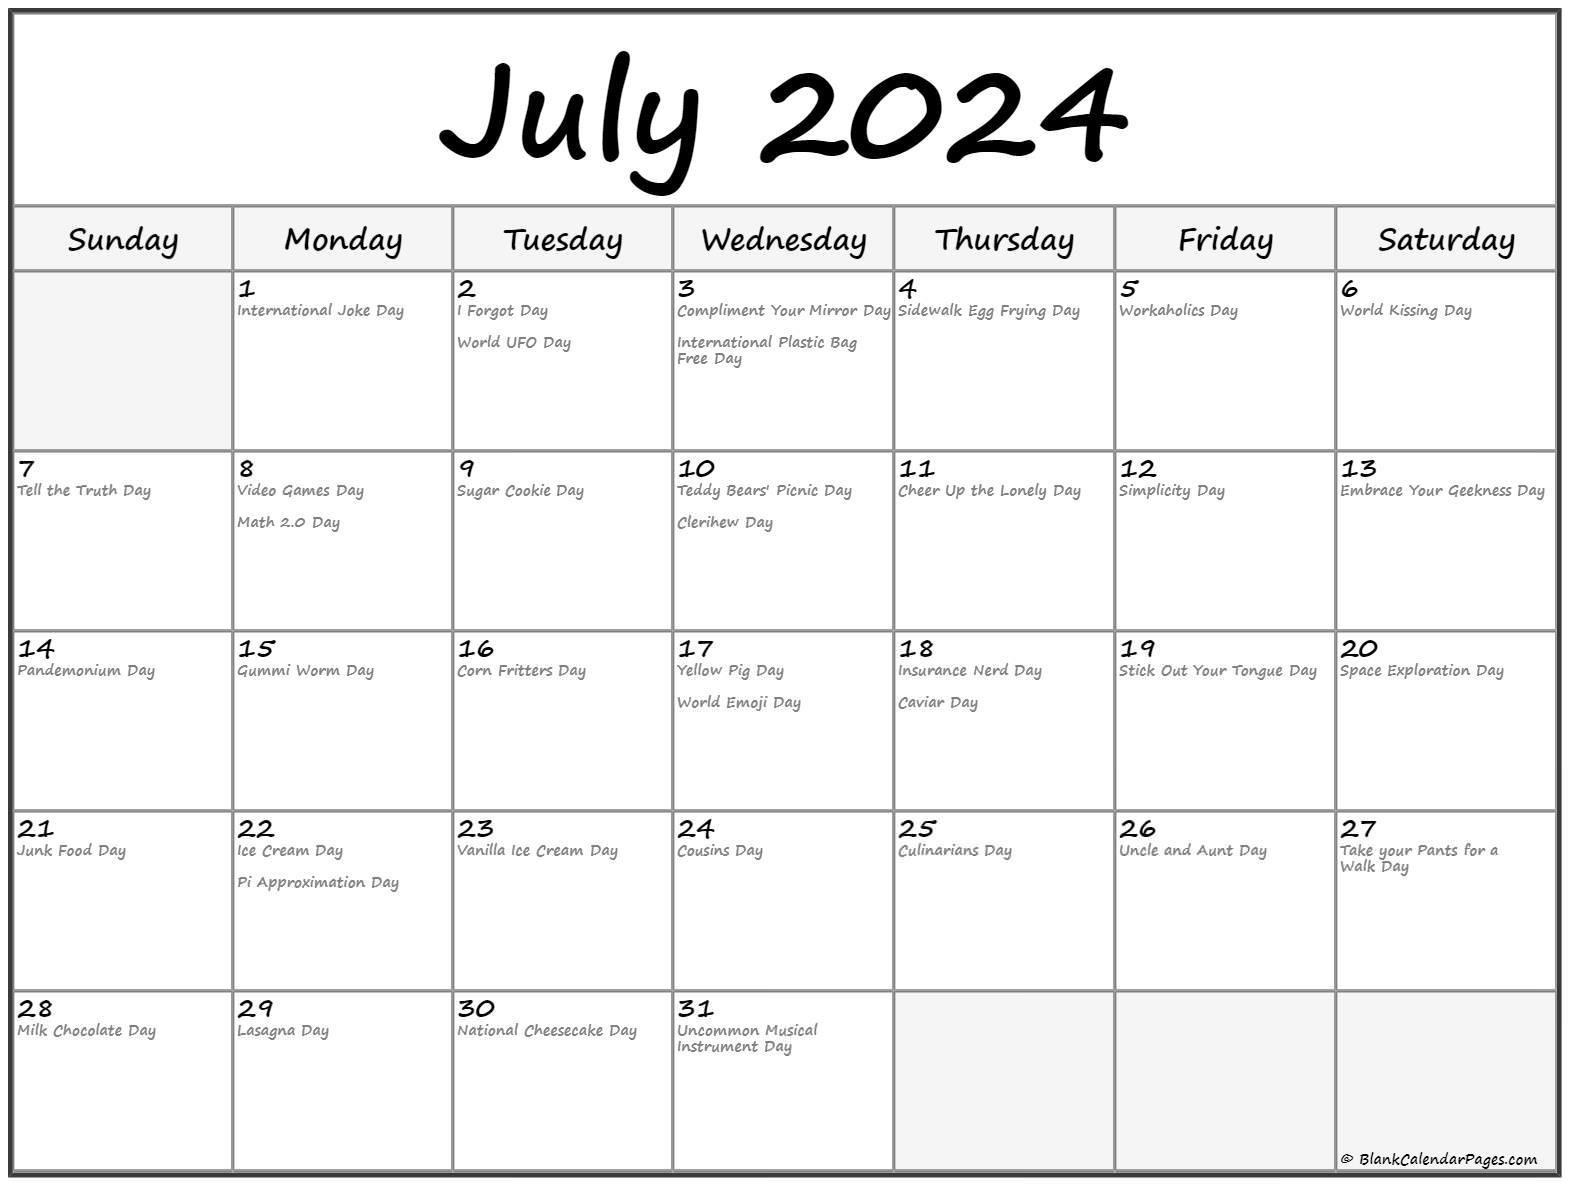 July 2024 With Holidays Calendar within Fun Calendar Days in July 2024